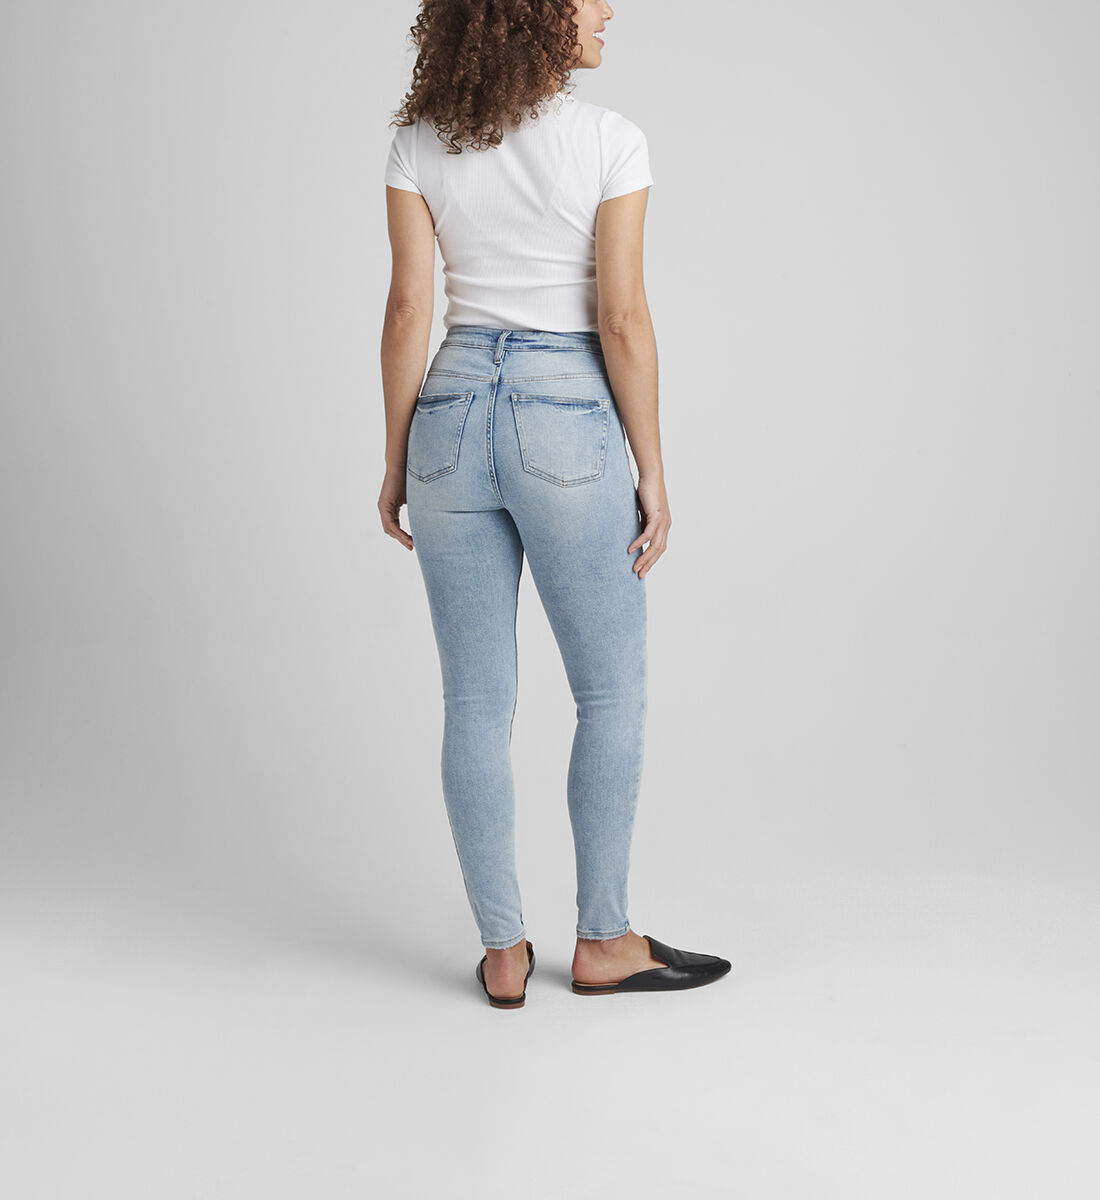 Women's High Rise Jeans | Silver Jeans Co.